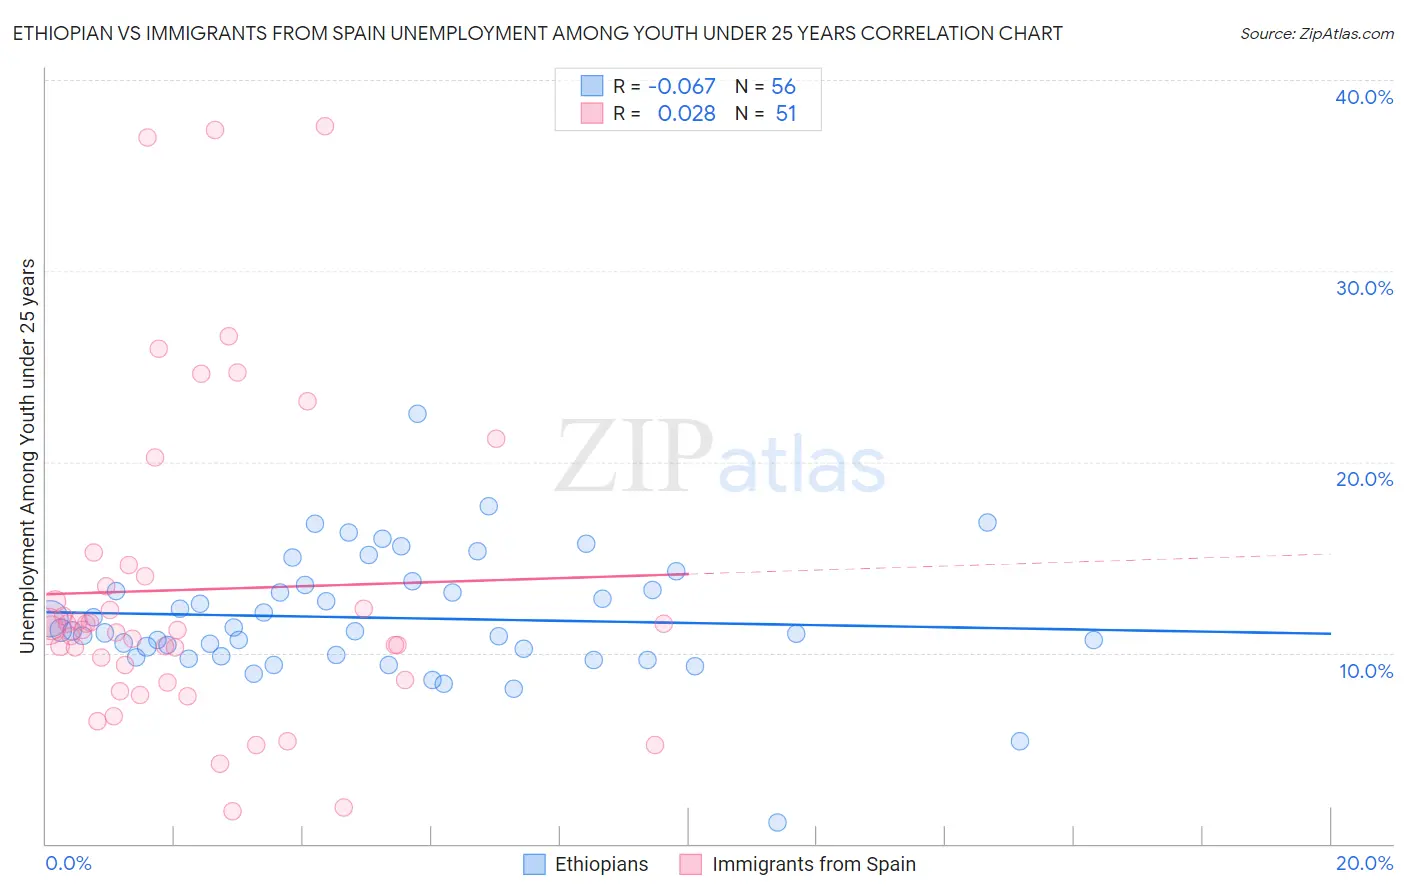 Ethiopian vs Immigrants from Spain Unemployment Among Youth under 25 years